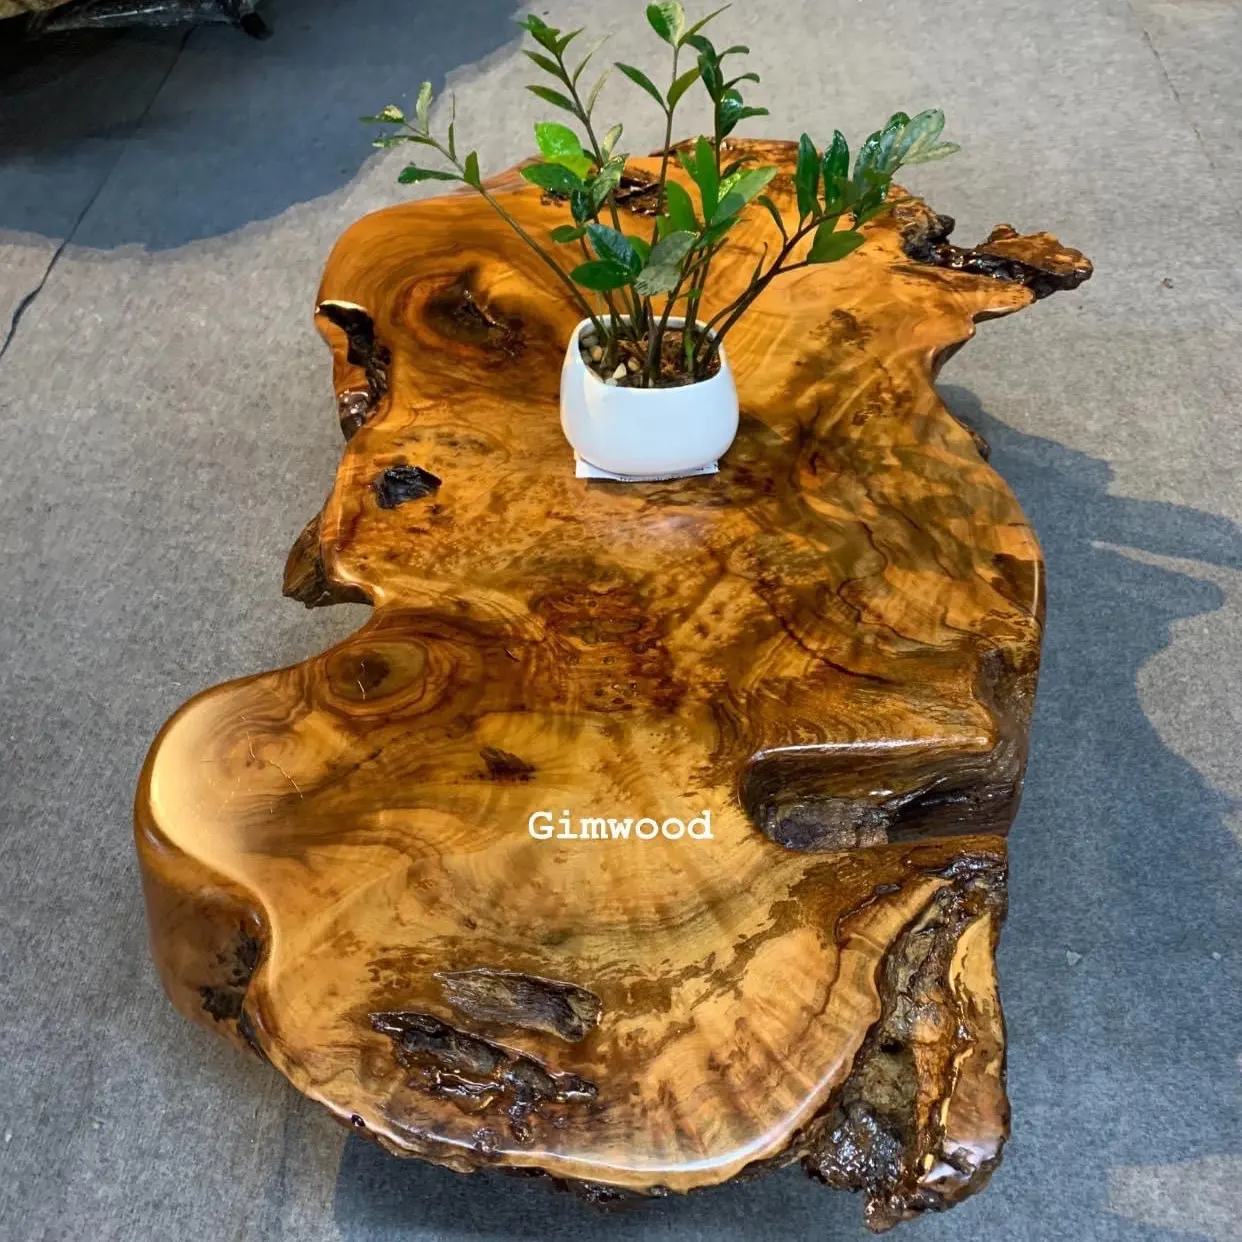 WHOLESALE LIVE EDGE/STRAIGHT/BURL SOLID WOOD SLAB TABLE MORDEN STYLE MANUFACTURED IN VIETNAM WHATSAPP + 84373635126